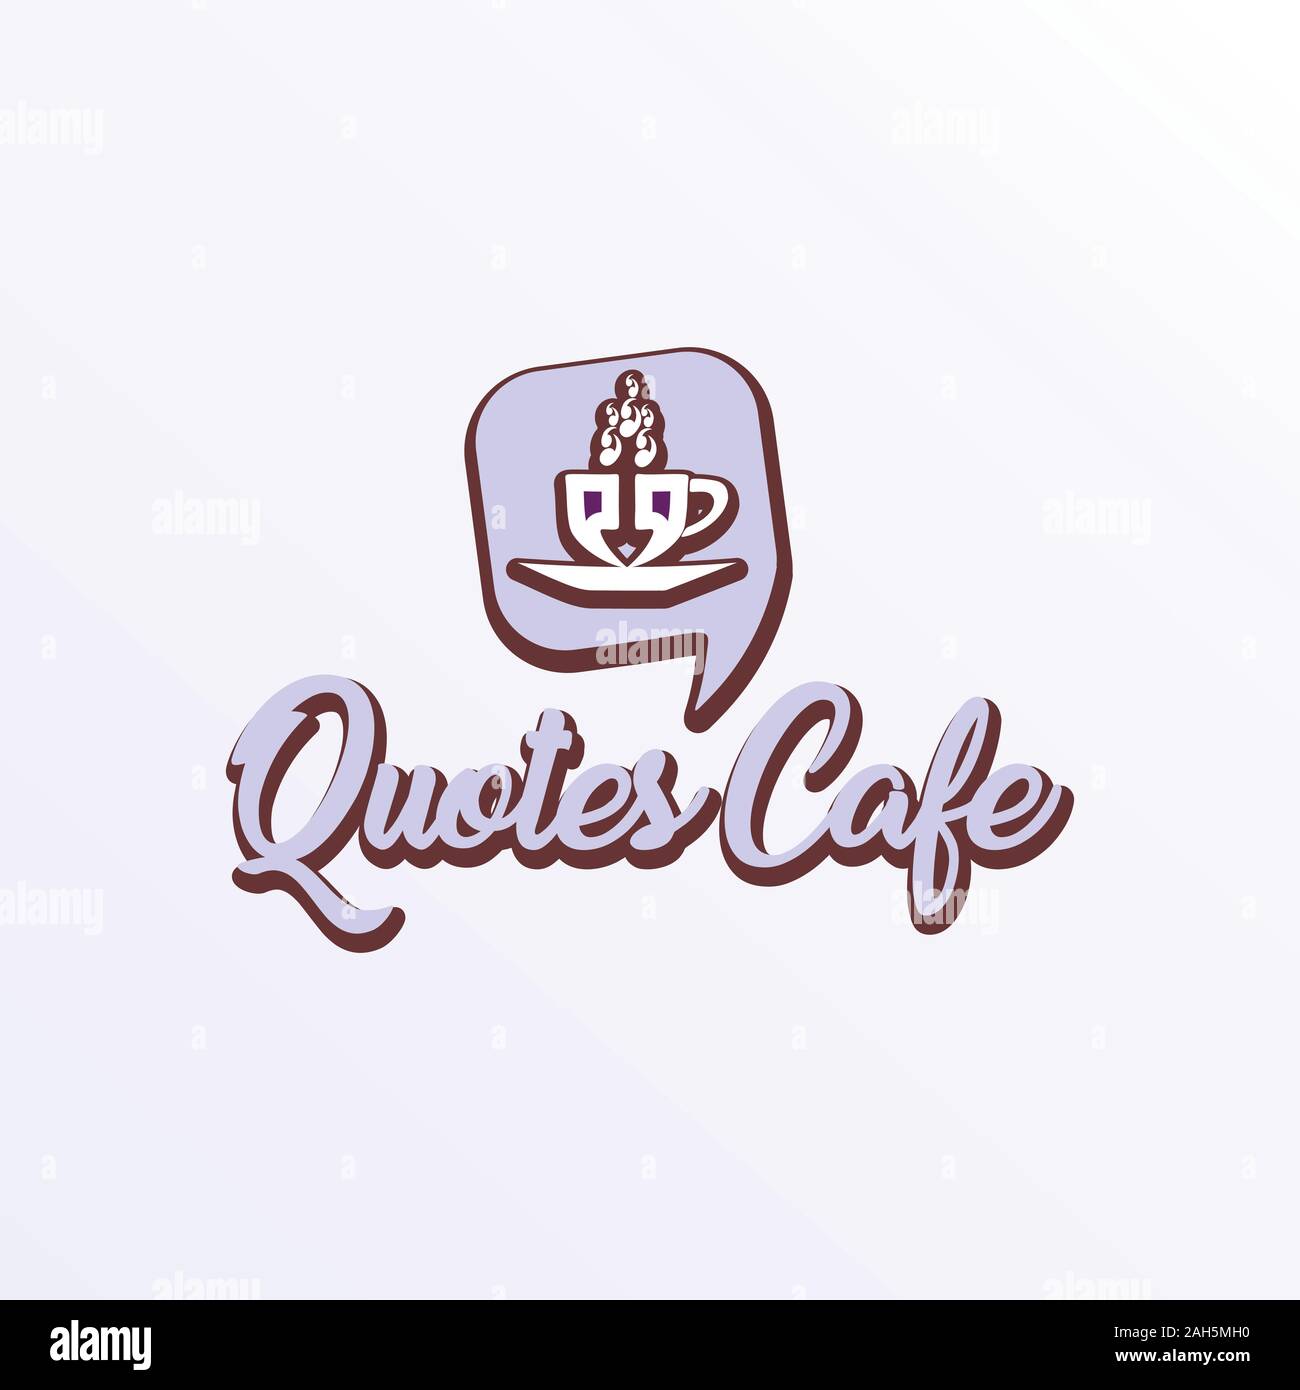 Quotes Cafe Logo Design Template, Call Out Logo Concept, Gray, Brown, White Background, Coffee Cup Icon, Quotation Mark Element Stock Vector